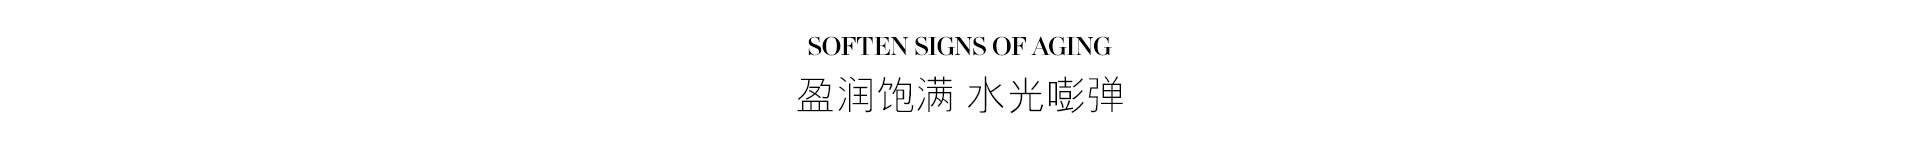 SOFTEN SIGNS OF AGING 盈润饱满 水光嘭弹